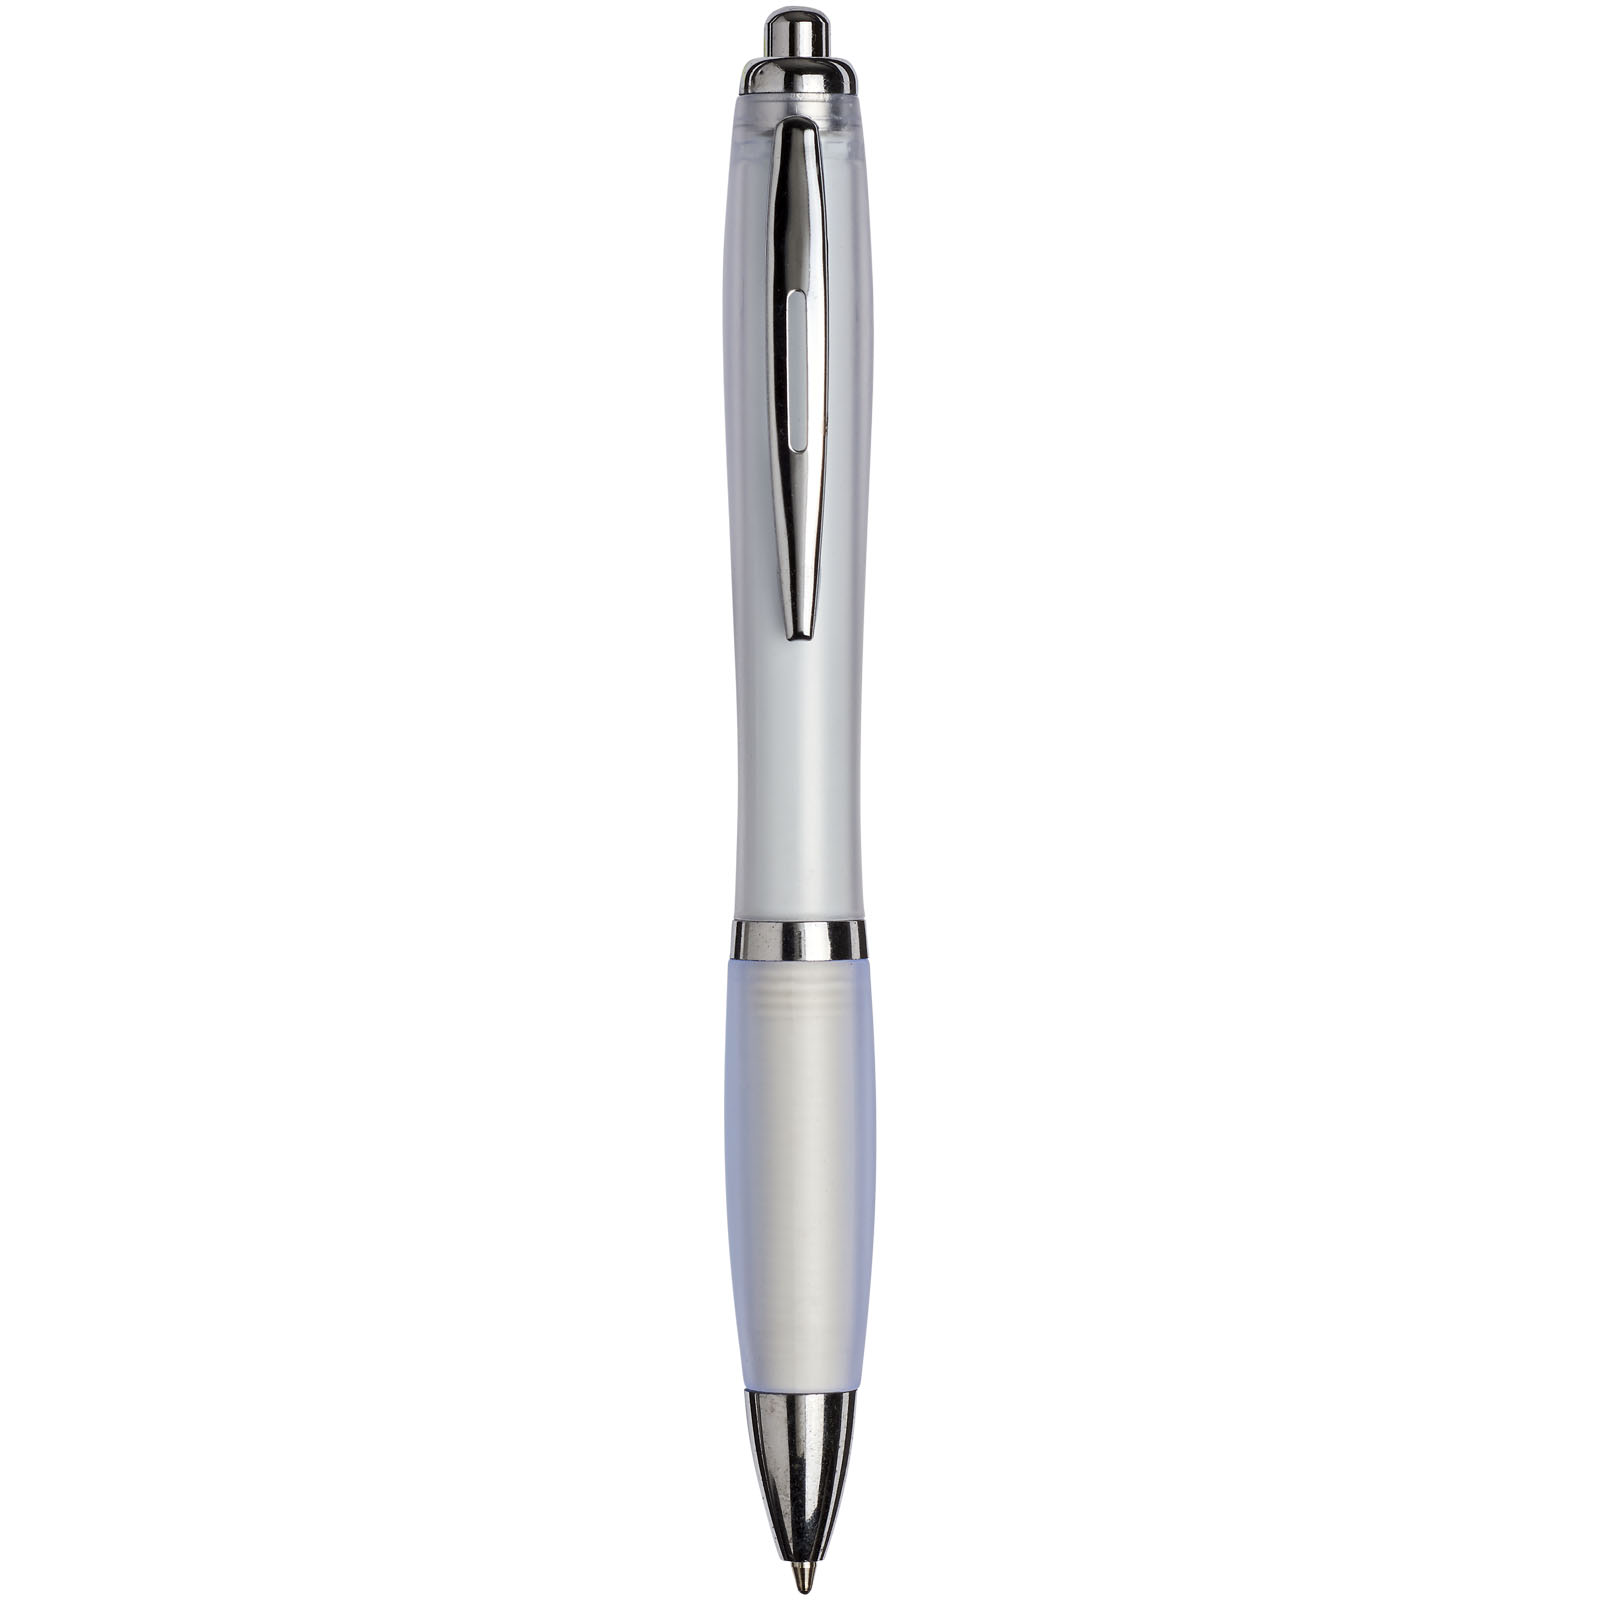 Stylos-bille - Curvy ballpoint pen with frosted barrel and grip